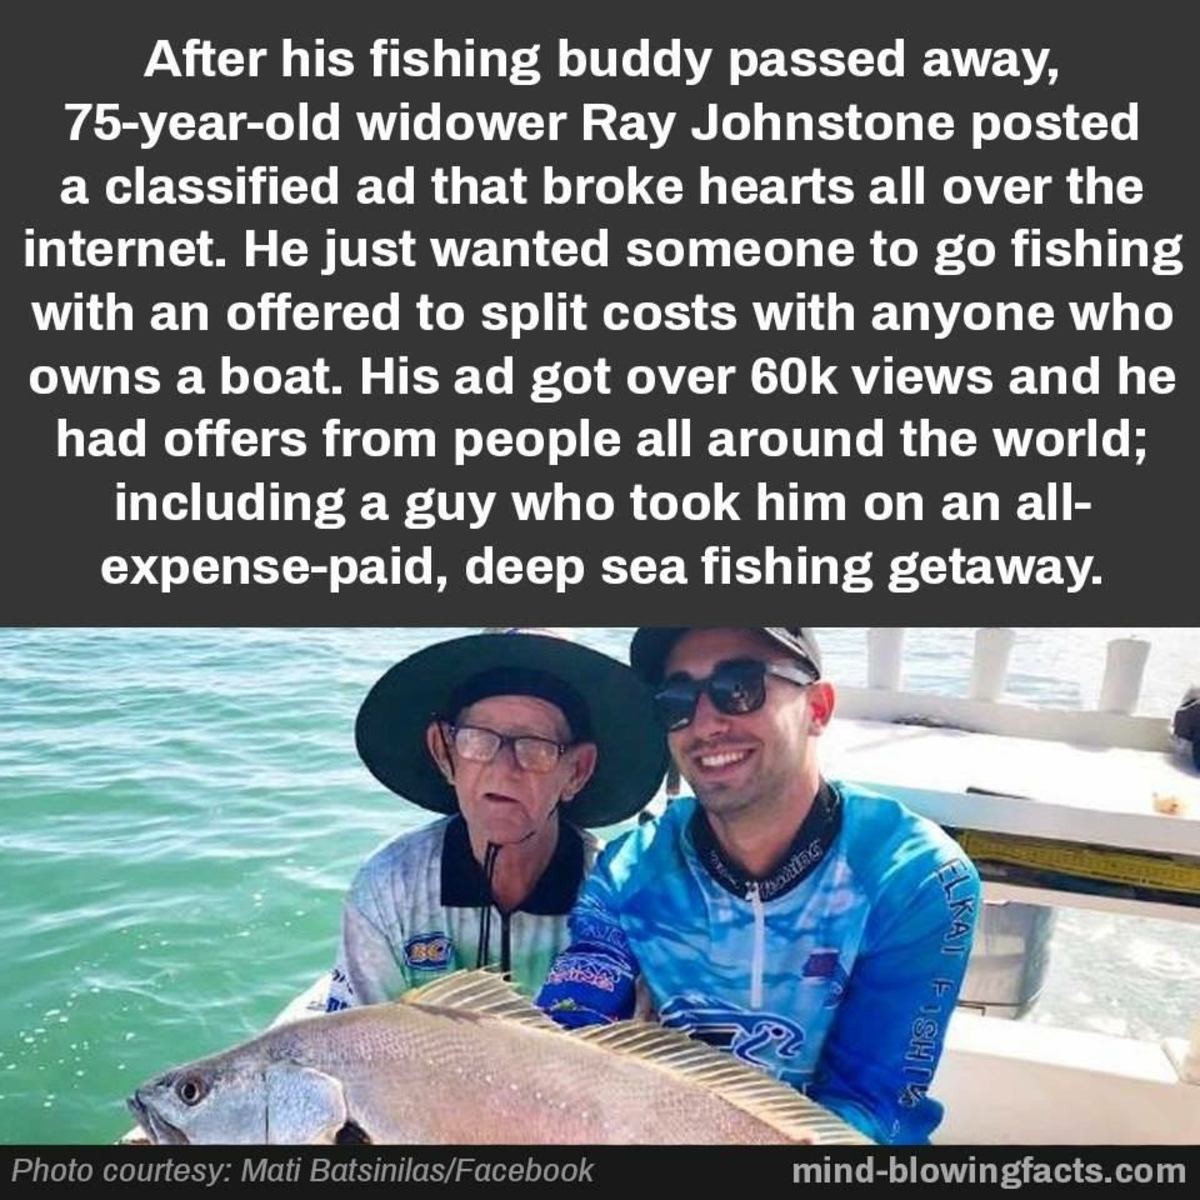 There’s still good people. Here’s the full story: www.abc.net.au/news/2017-02-07/gumtree-widower-ray-johnstone-reels-in-brisbane-fishing-buddy/8247032. After hi